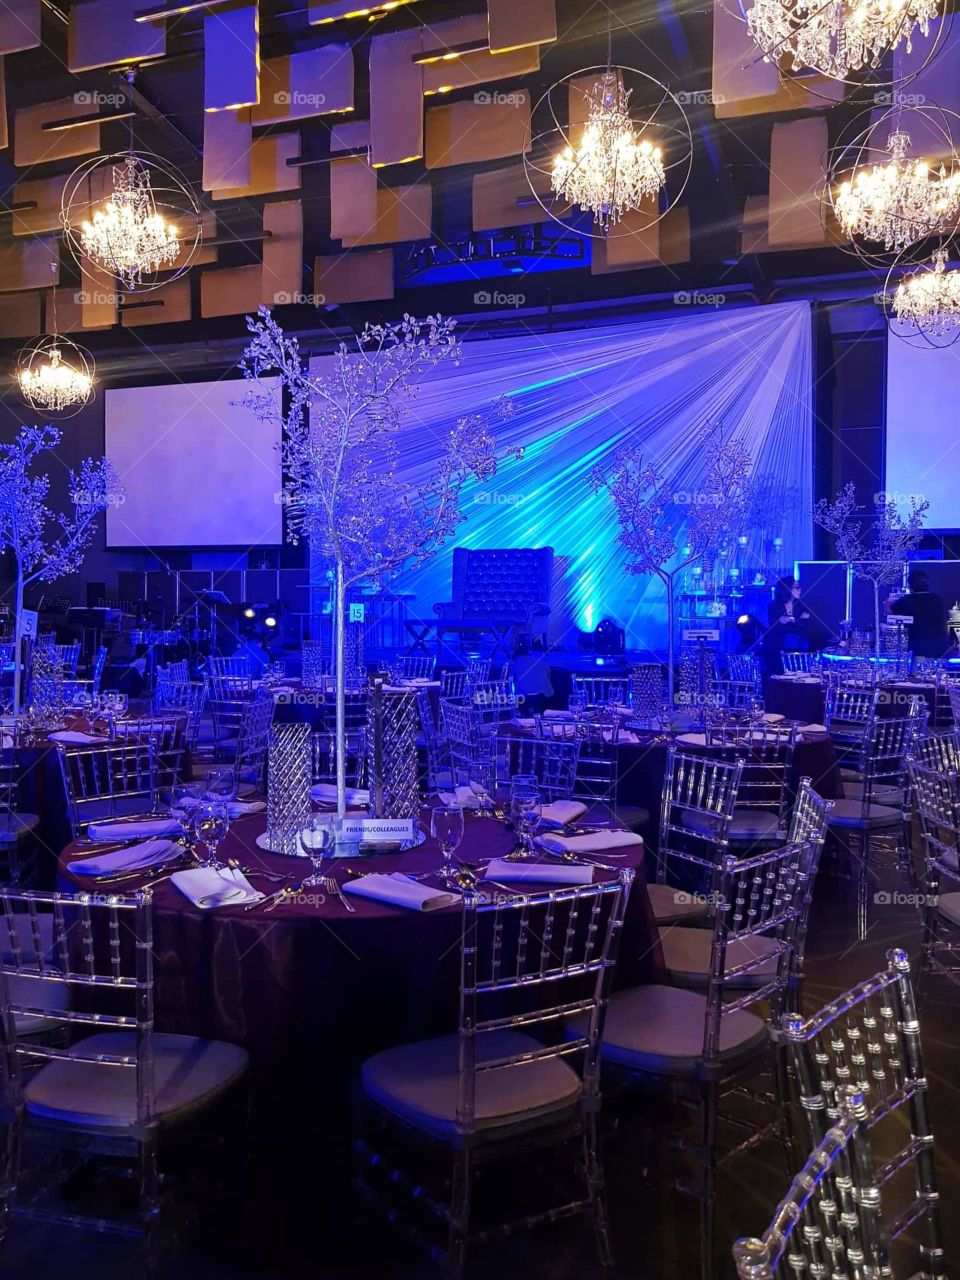 Organized chairs and tables under those sightseeing and shimmering chandeliers inside a modern hotel, where a special celebration will be held.